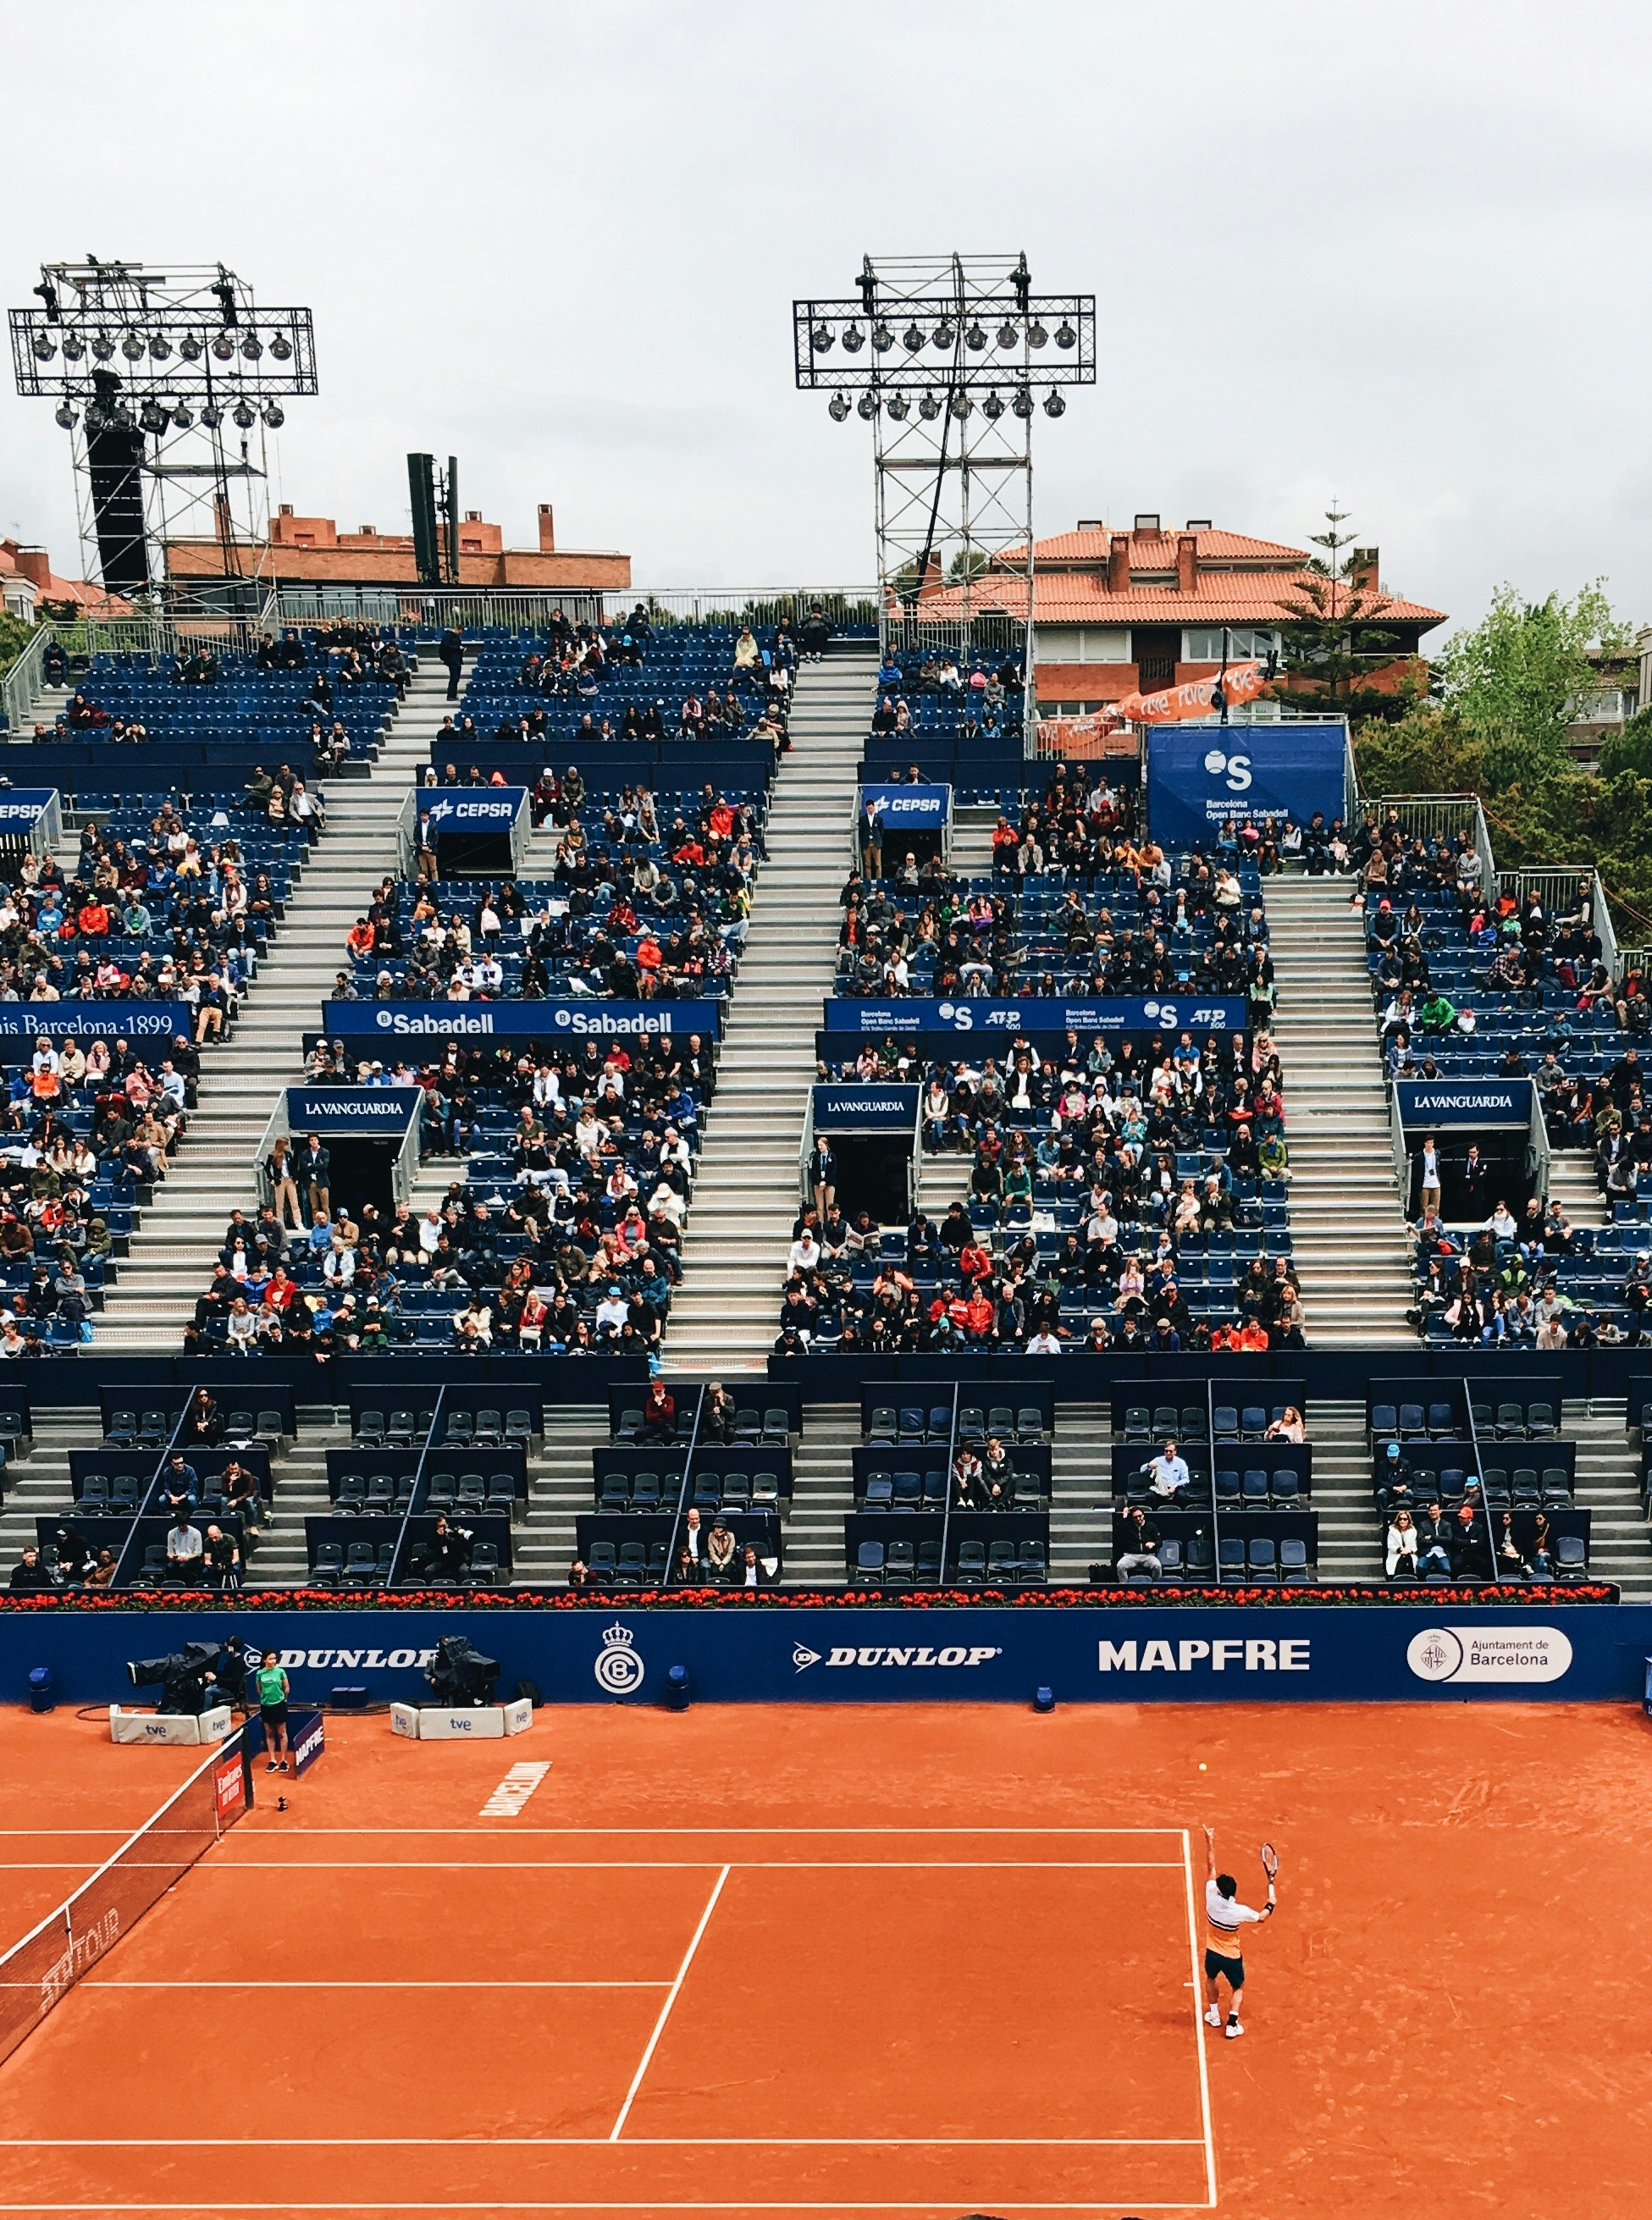 Tennis' fan since I was a boy, this year I got the opportunity to went to the Barcelona's Open Banc Sabadell Tournament. Where tennis' stars like Rafael Nadal, Alexander Zverev, Dominic Thiem and so on took part. It was an incredible.